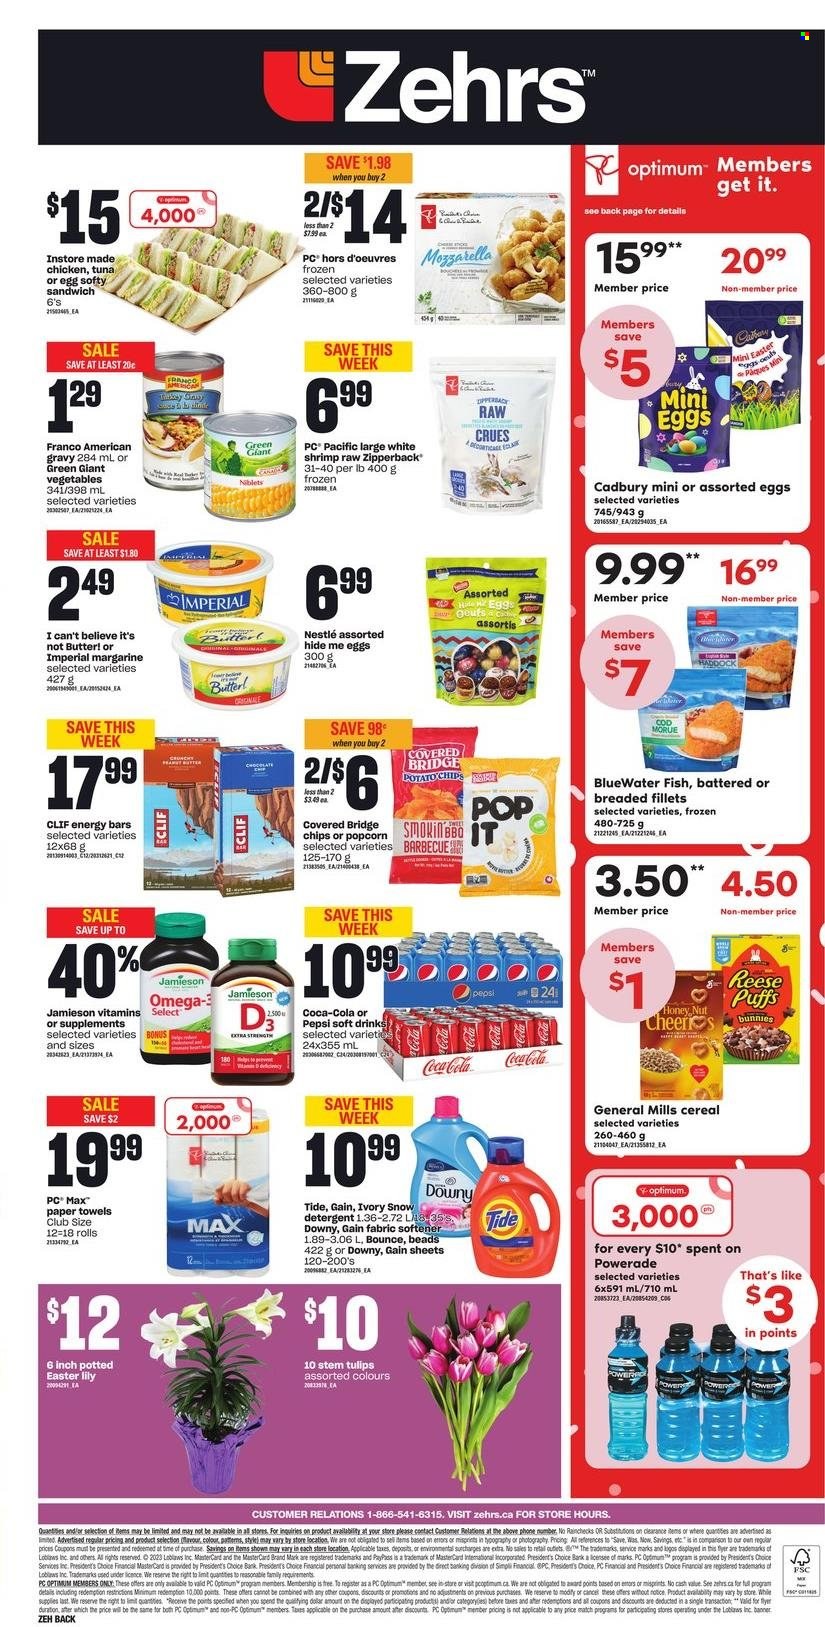 thumbnail - Zehrs Flyer - March 30, 2023 - April 05, 2023 - Sales products - puffs, cod, tuna, haddock, fish, shrimps, sandwich, margarine, I Can't Believe It's Not Butter, chocolate, Cadbury, potato chips, popcorn, cereals, energy bar, Coca-Cola, Powerade, Pepsi, soft drink, chicken, kitchen towels, paper towels, Gain, Tide, fabric softener, Bounce, Optimum, tulip, lily, Omega-3, detergent, mozzarella, Nestlé. Page 2.